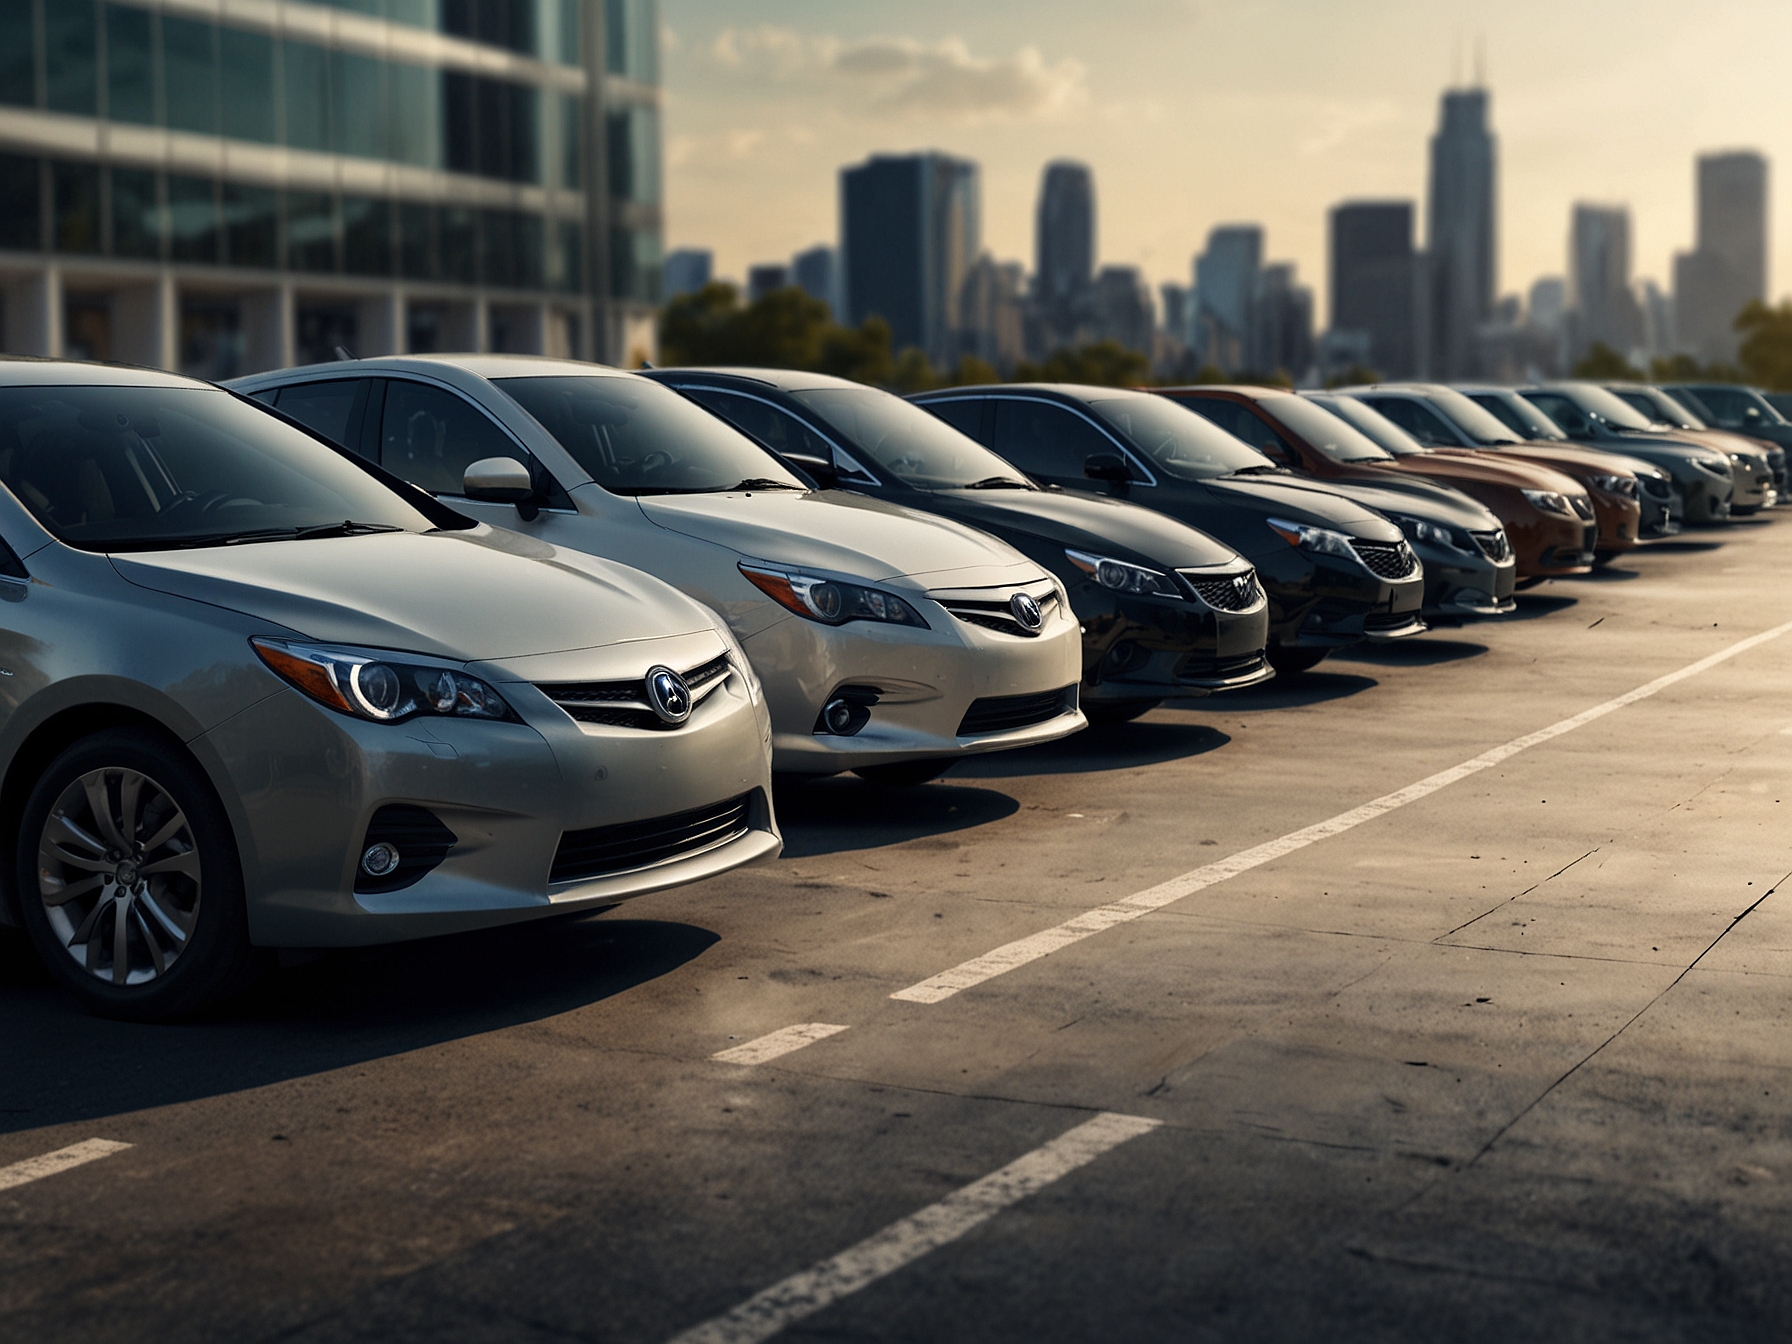 A diverse lineup of hybrid vehicles displayed at an auto show, showcasing compact cars, SUVs, and luxury sedans. These cars represent the shift towards eco-friendly transportation solutions.